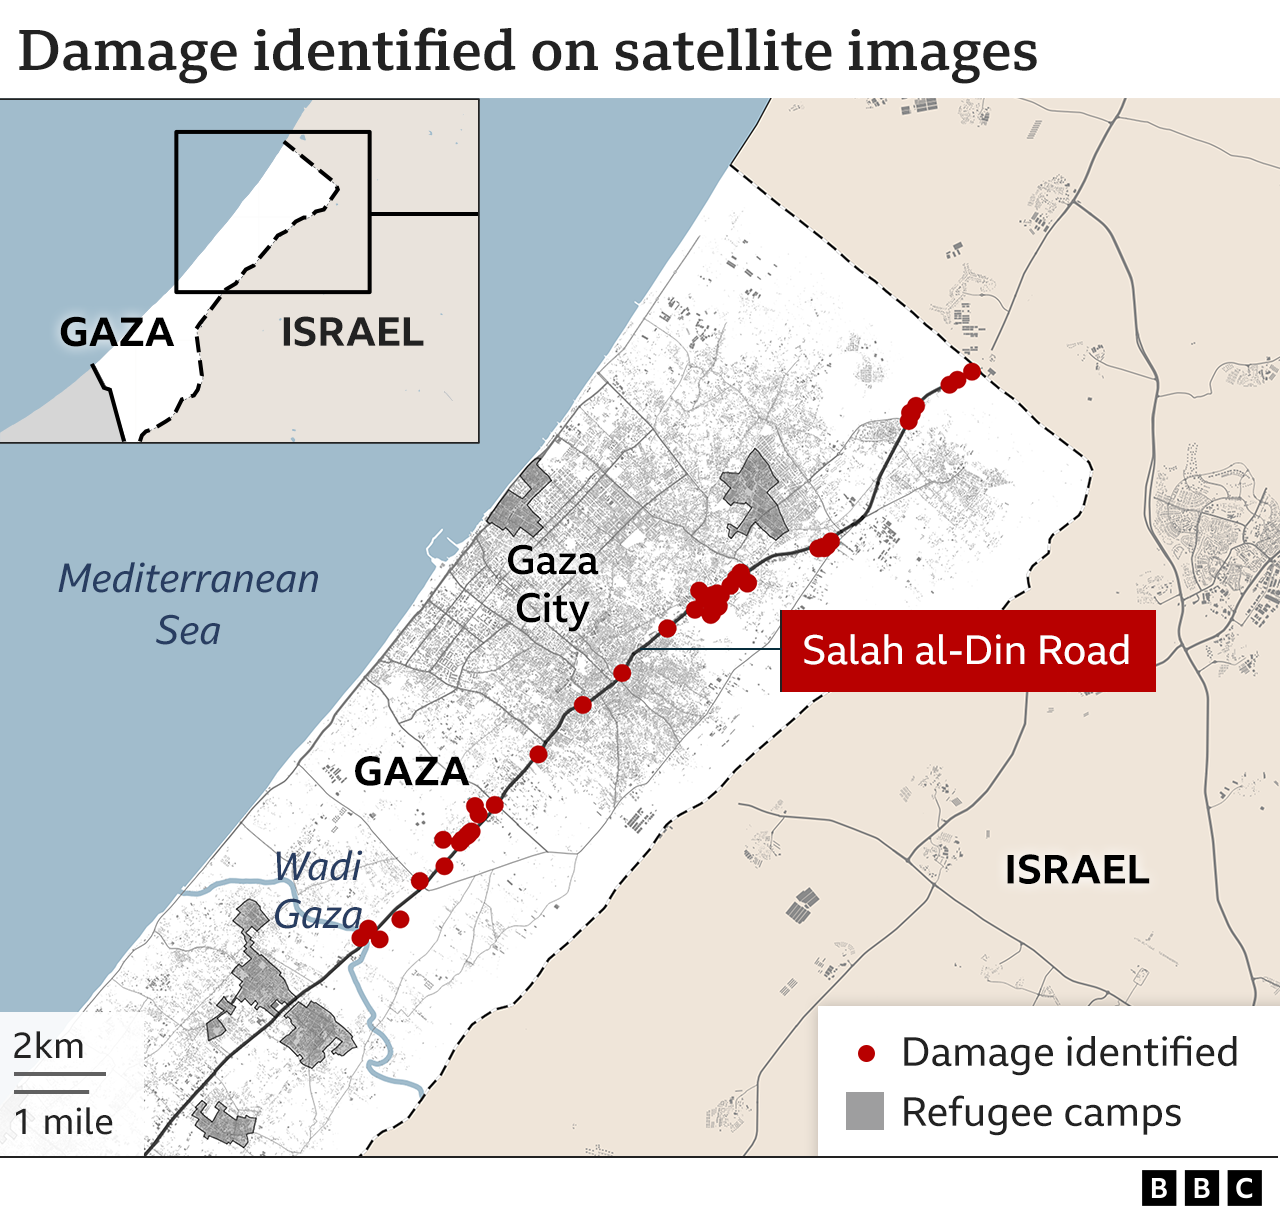 A map of Gaza showing Salah al-Din Road, the main evaucation routes from the north to below the Wadi Gaza down south, with damage identified along the road on satellite images